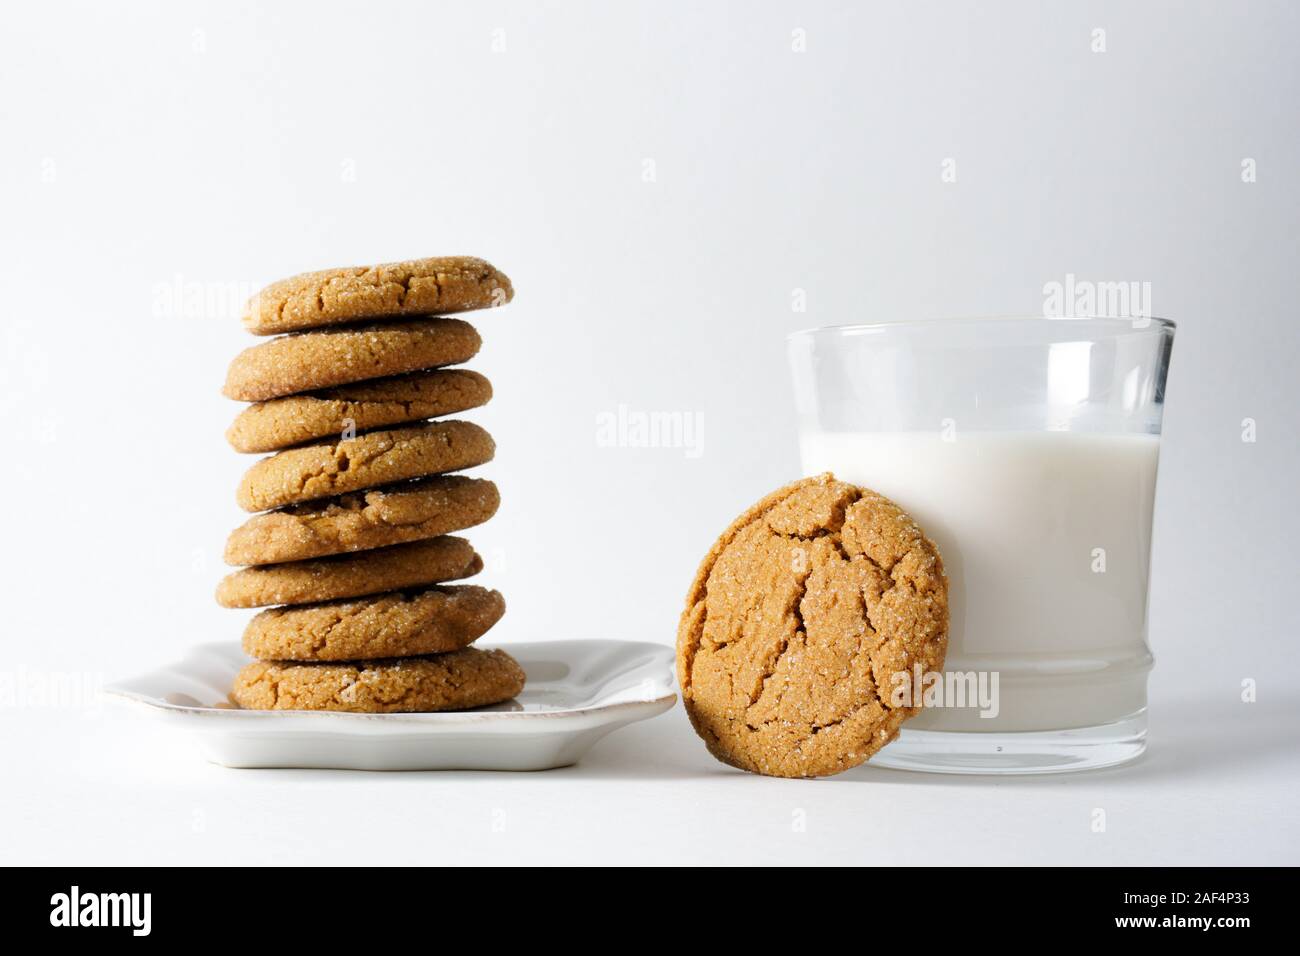 A glass of milk with a ginger cookie leaning against it next to a stack of ginger cookies on a white plate with a white background; copy space Stock Photo